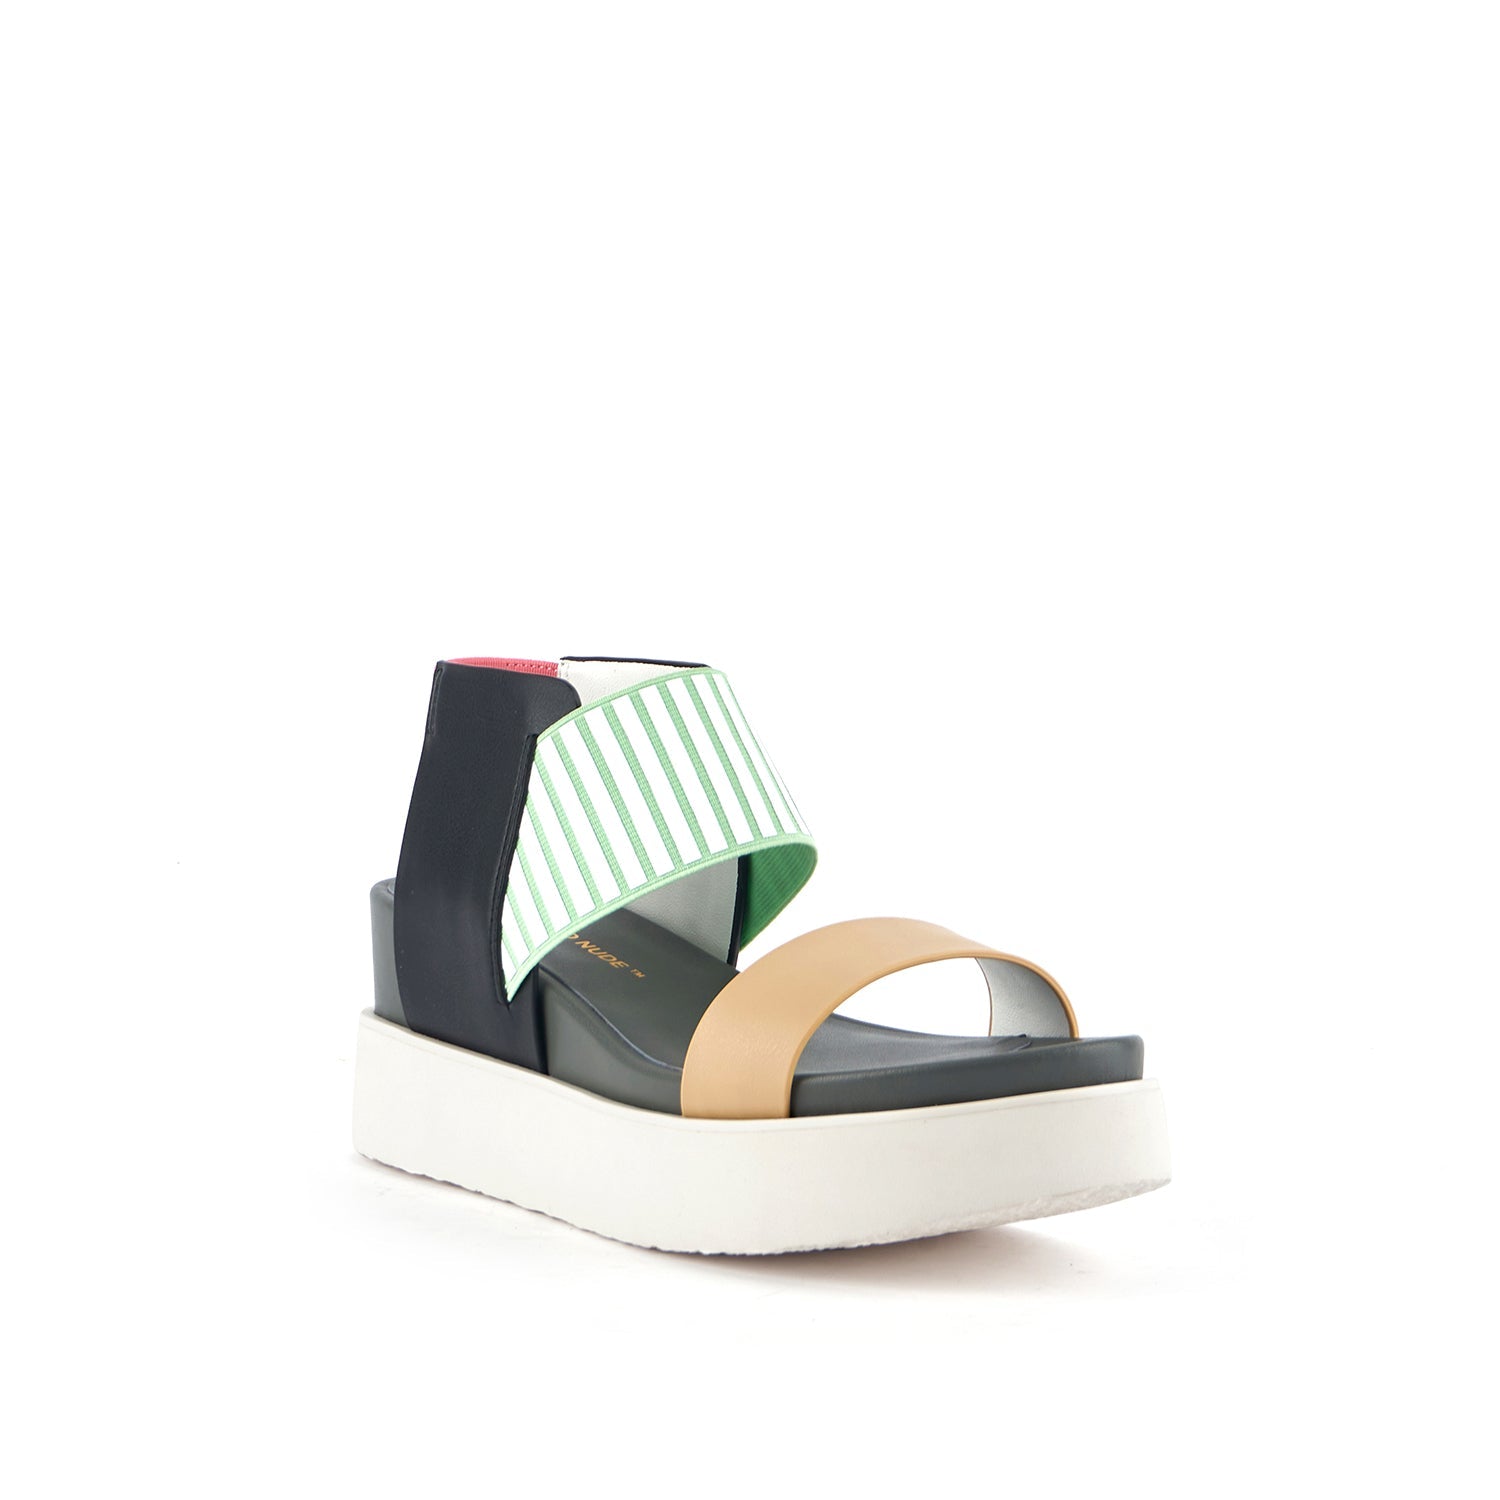 Outer front side view of the united nude rico sandal in the color serenity.